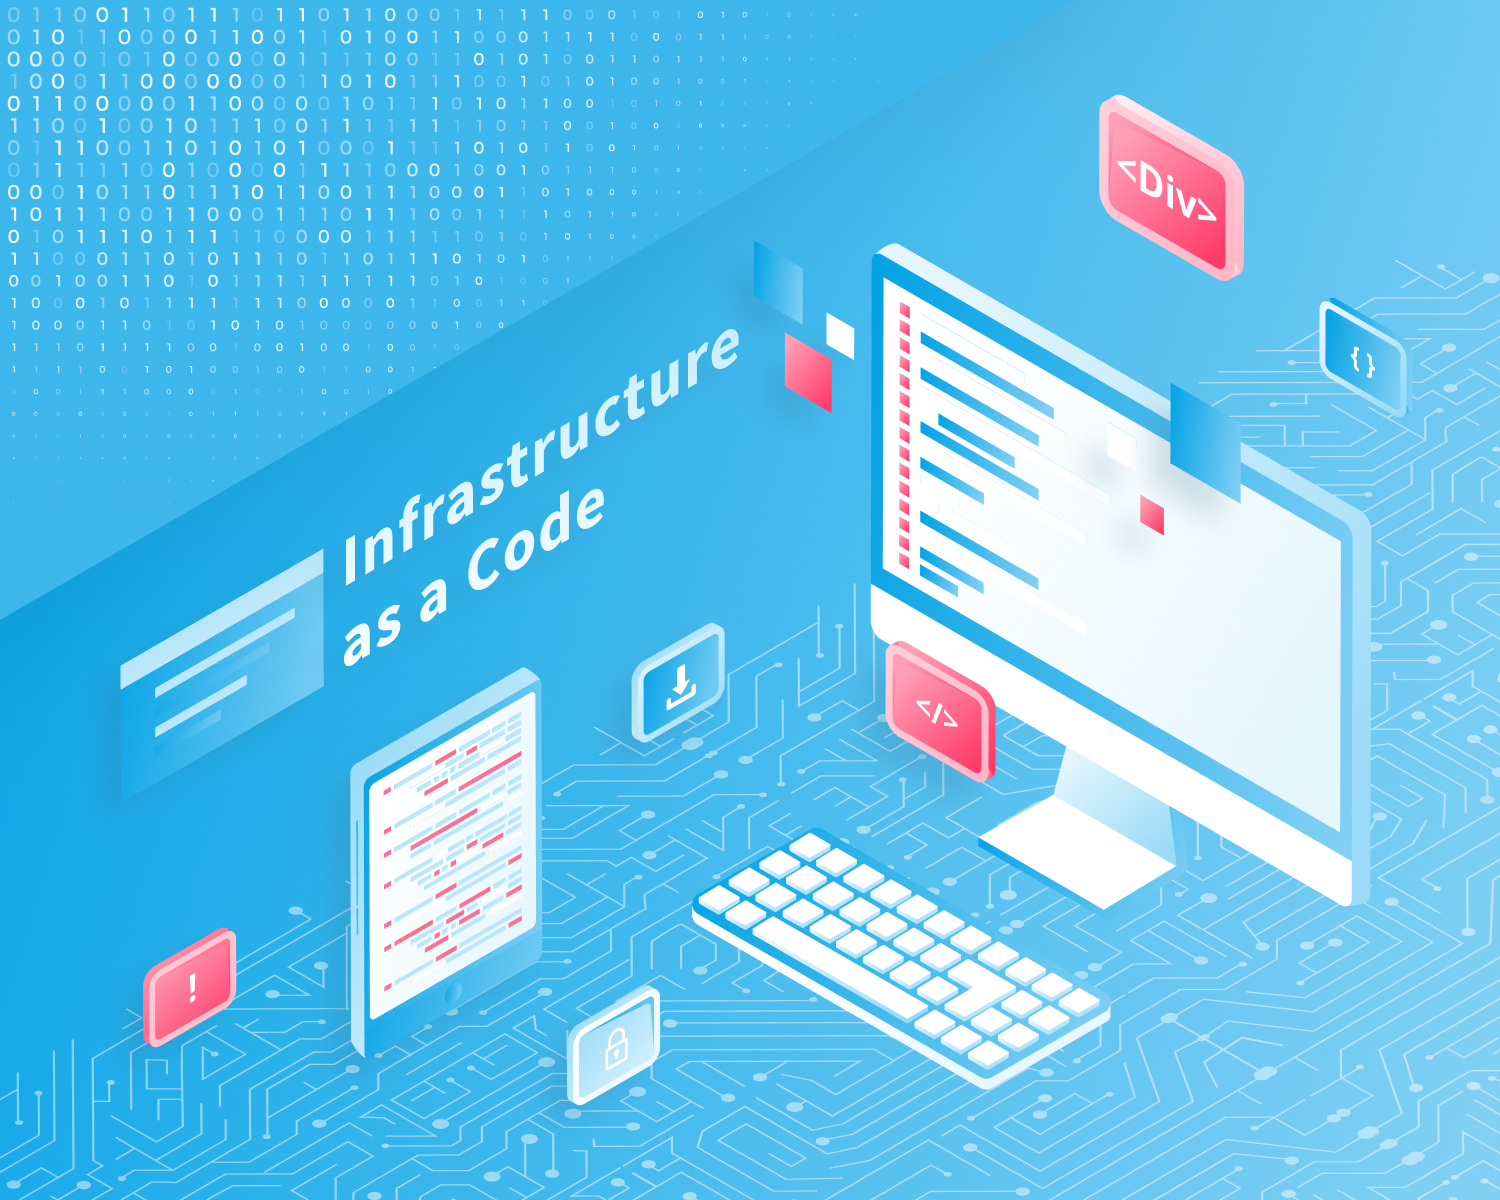 Infrastructure as a Code advantages